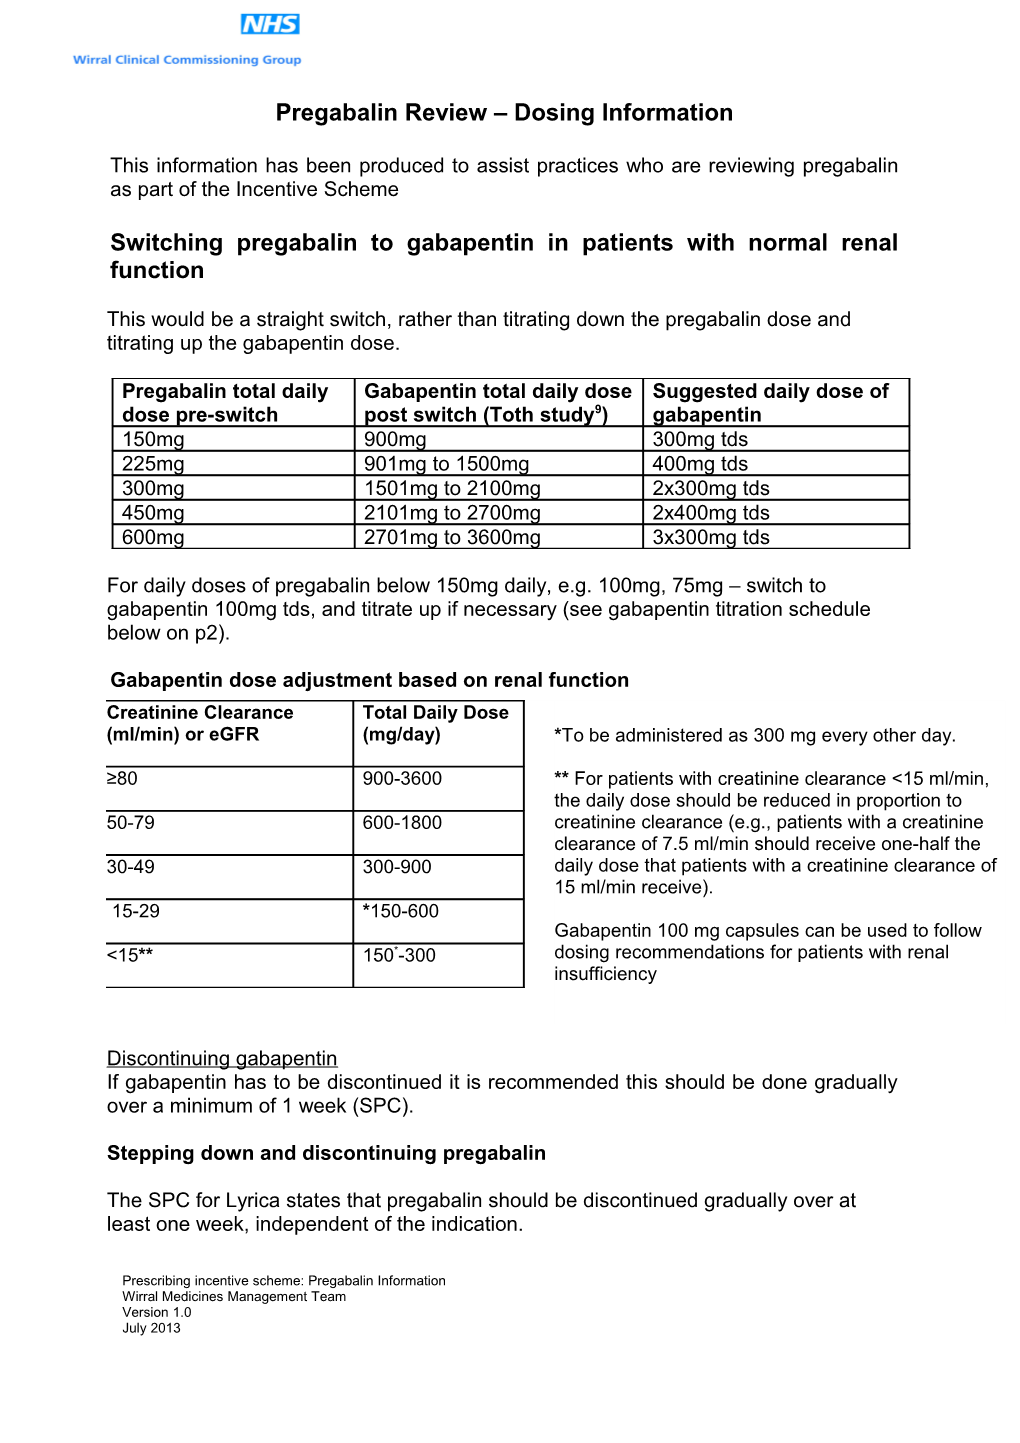 Switching Pregabalin to Gabapentin in Patients with Normal Renal Function8